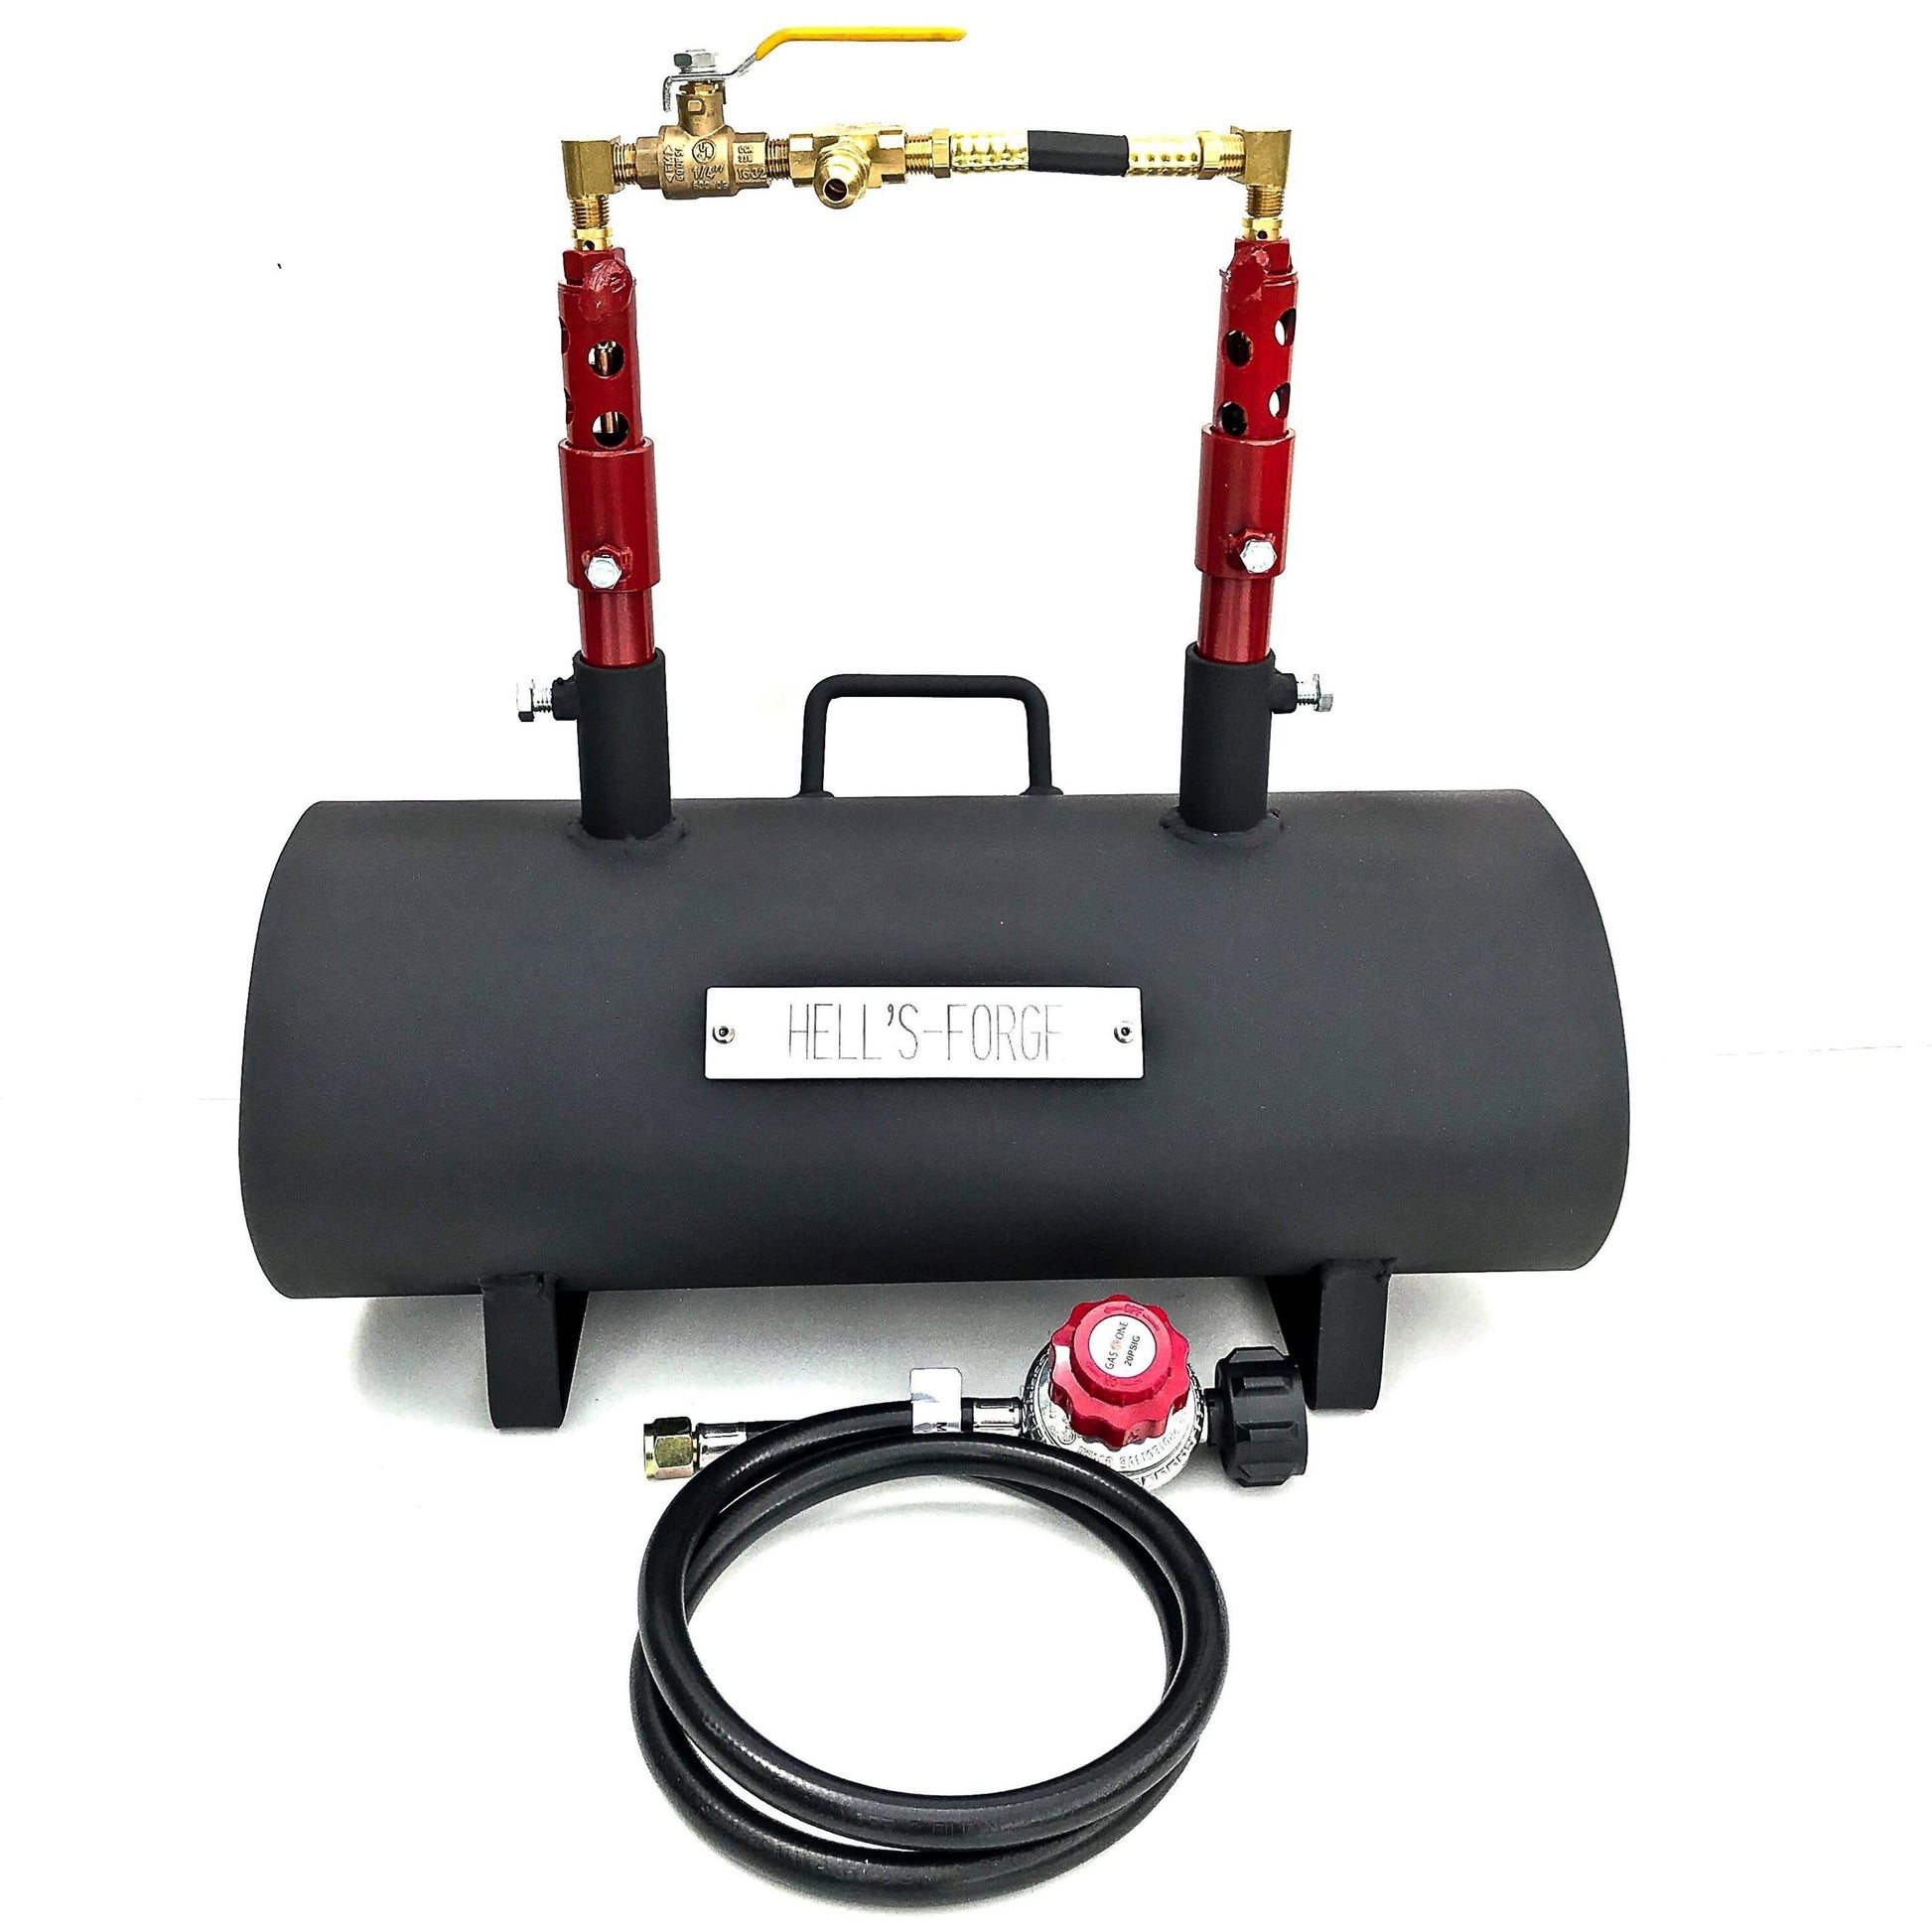 Hell's Forge USA Gas Portable Propane Forge Double Burner - For blacksmithing, bladesmithing, knifemaking, farrier forge tools and large size provides max workspace. Perfect for Forged In Fire fans. The Best Forges - MADE IN THE USA!